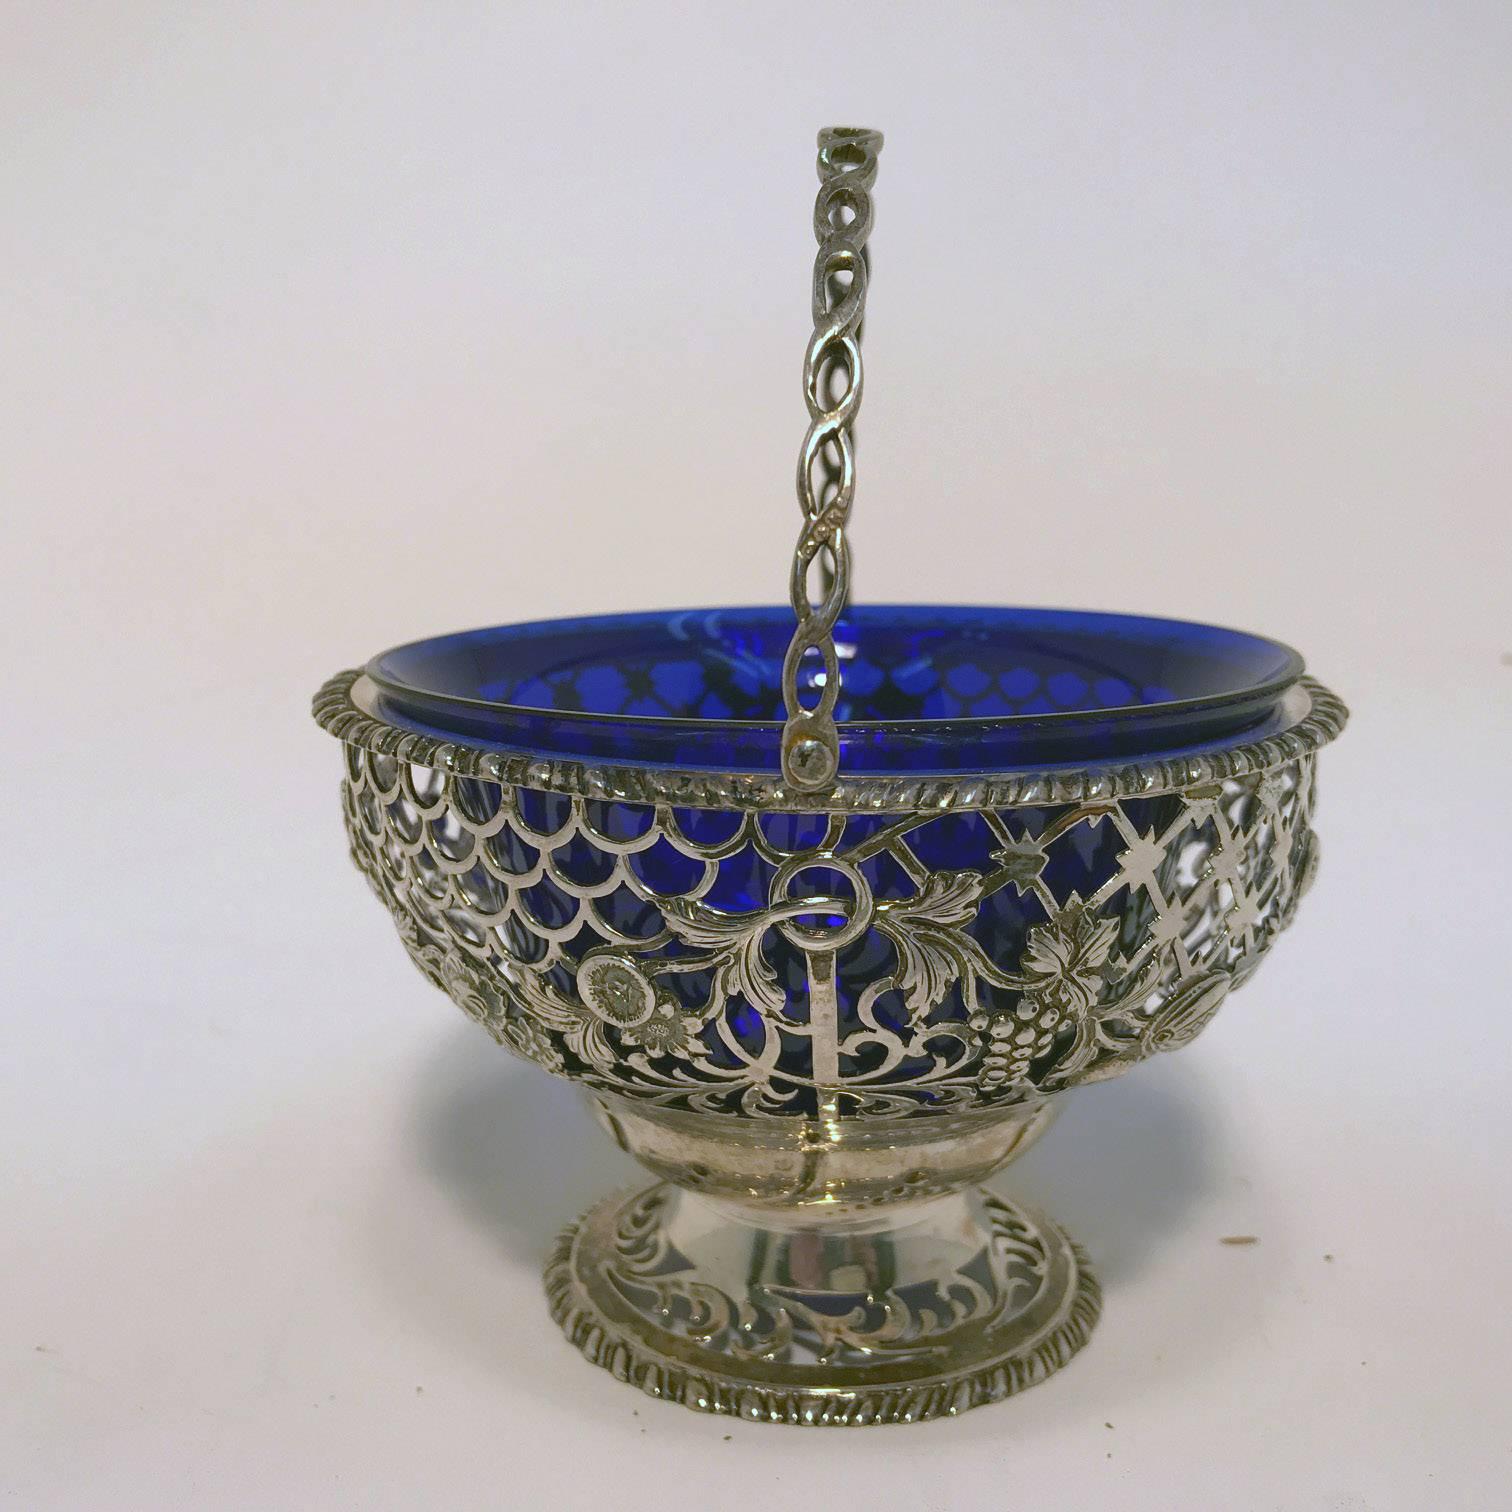 Pierced silver basket with cobalt blue glass liner and swing handle; hallmark for Wakely & Wheeler, Dublin, 1911. (173 g.).